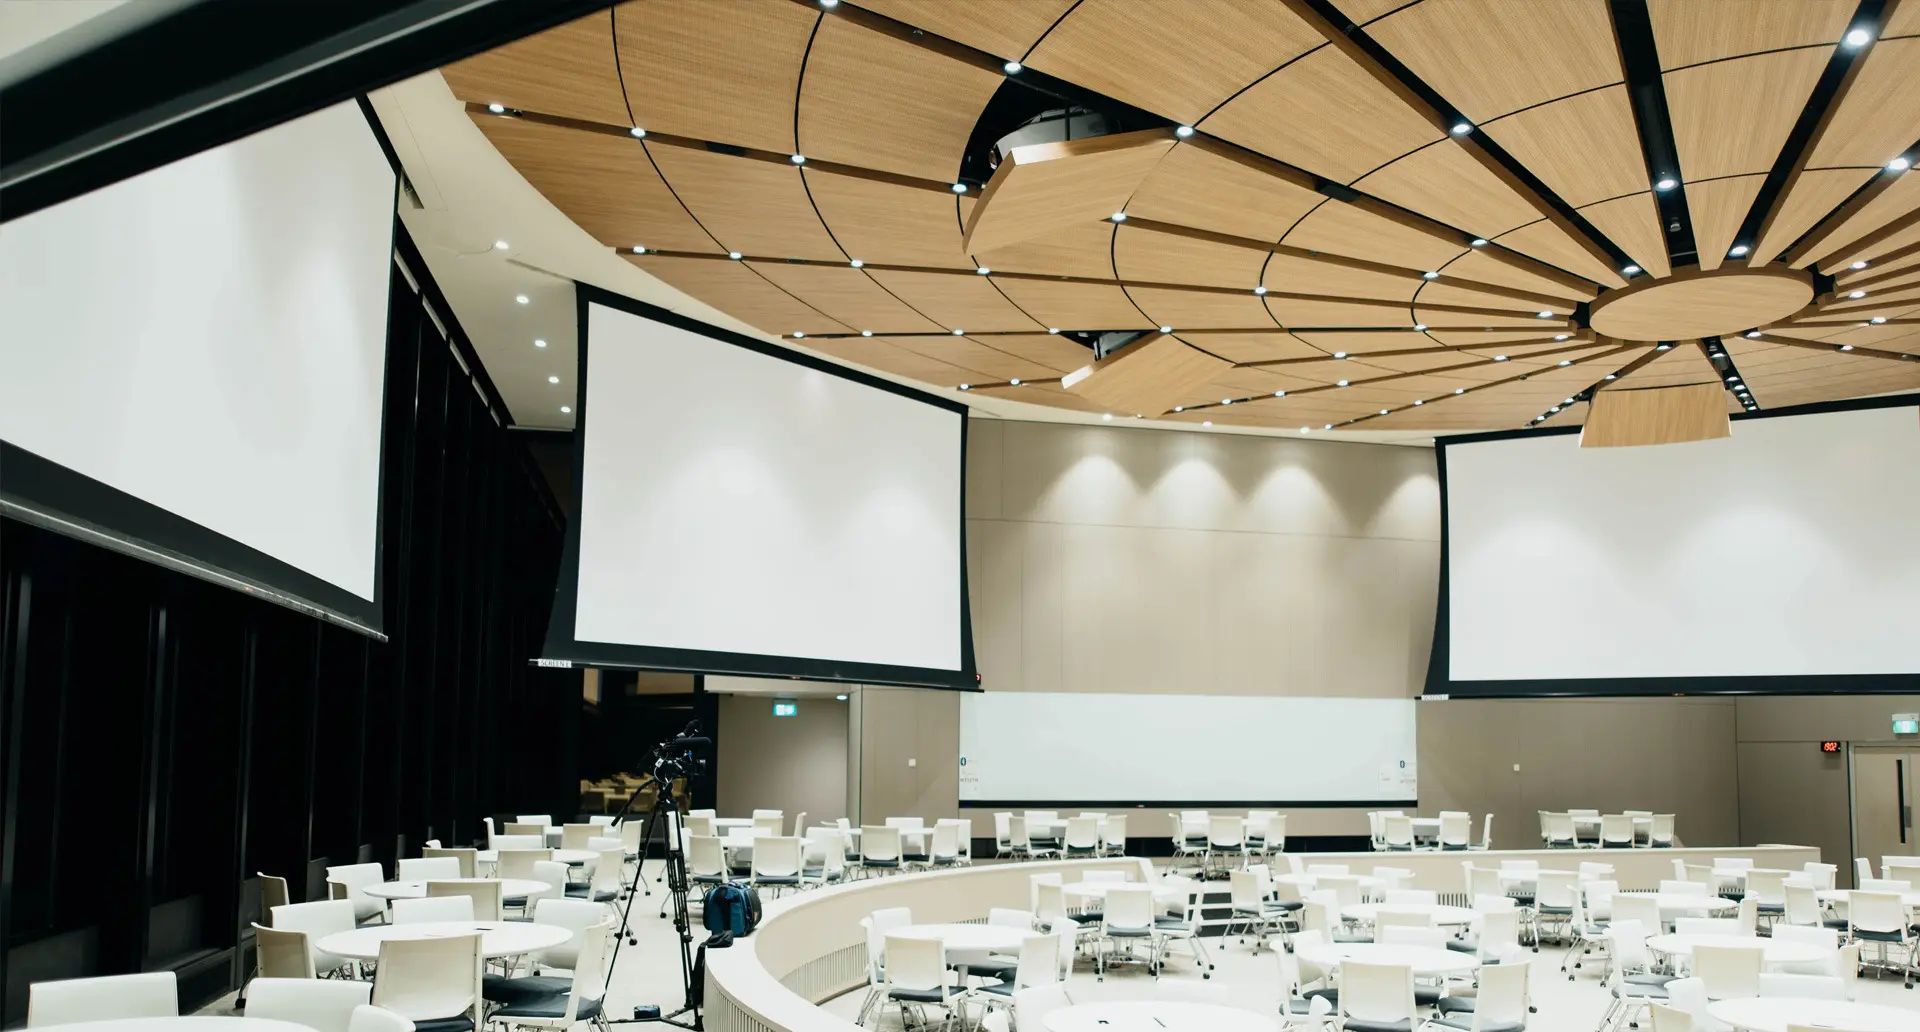 What are the crucial questions to ask when planning a commercial AV installation?